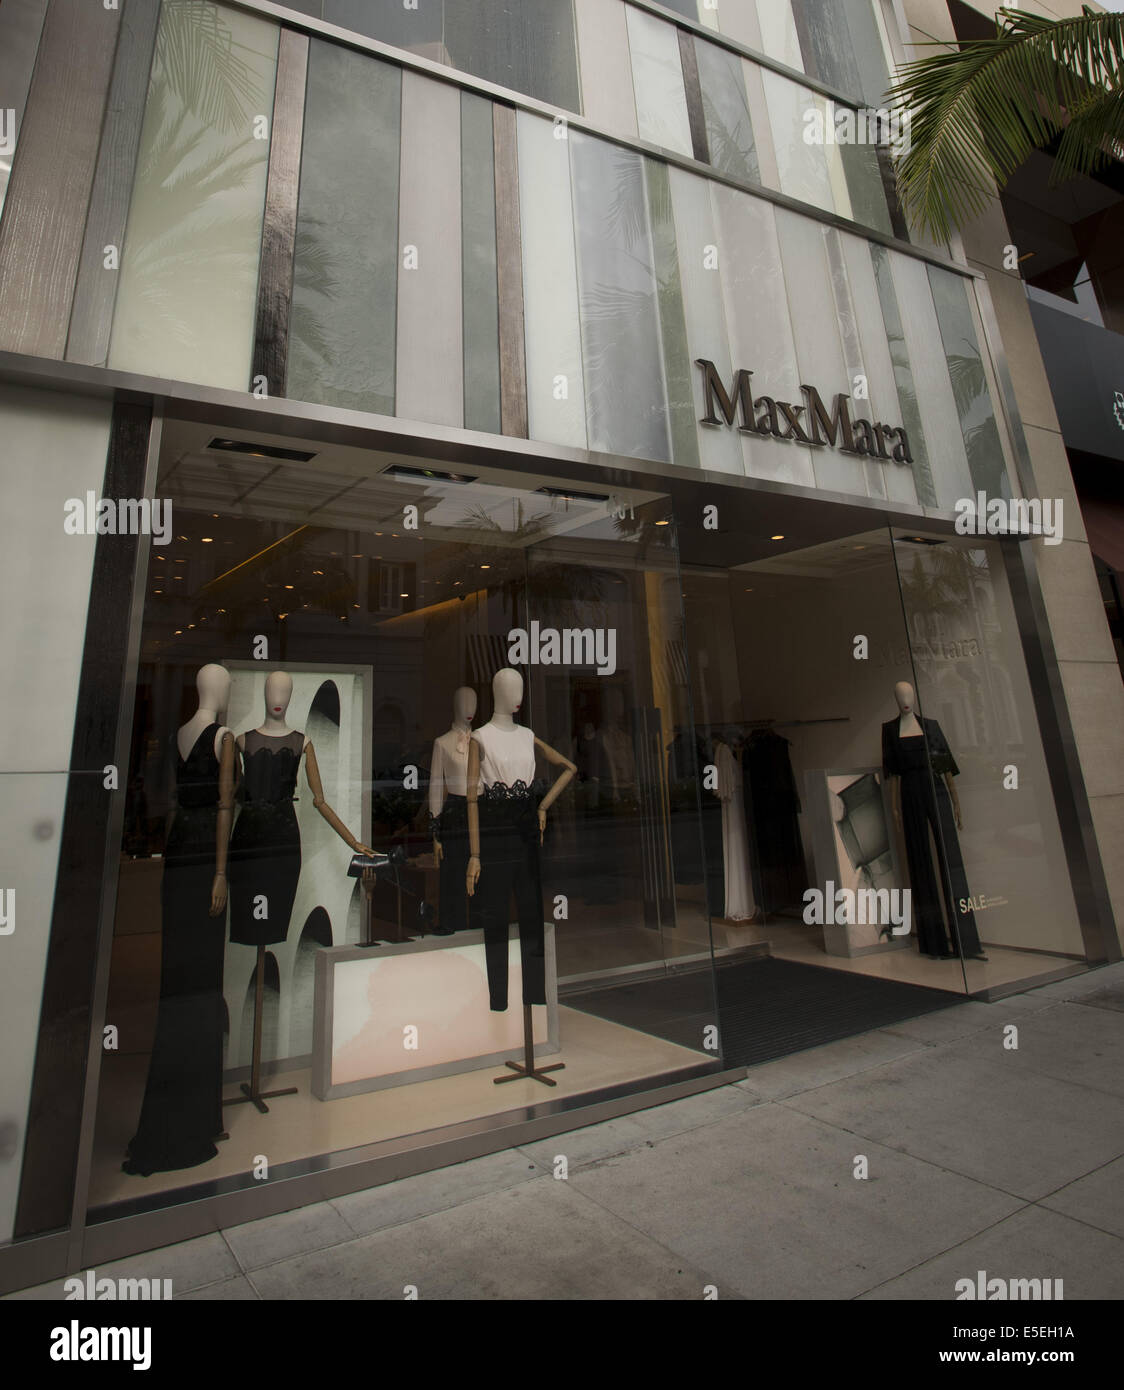 June 21, 2014 - Beverly Hills/Los Angeles, California, U.S - MaxMara on Rodeo Drive, is an Italian fashion house founded in 1951 with over 20 high quality designer collections while focusing on women's wear. --- Rodeo Drive, in the heart of Beverly Hills, is a two-way, two mile long, north south city street with a mix of small to large luxury homes, city parks and green areas as well as world class high end signature flagship stores and shops with globally known luxury goods at it's south end.---Beverly Hills, ranch land originally known as Rancho Rodeo de las Aguas, was subdivided into lots f Stock Photo